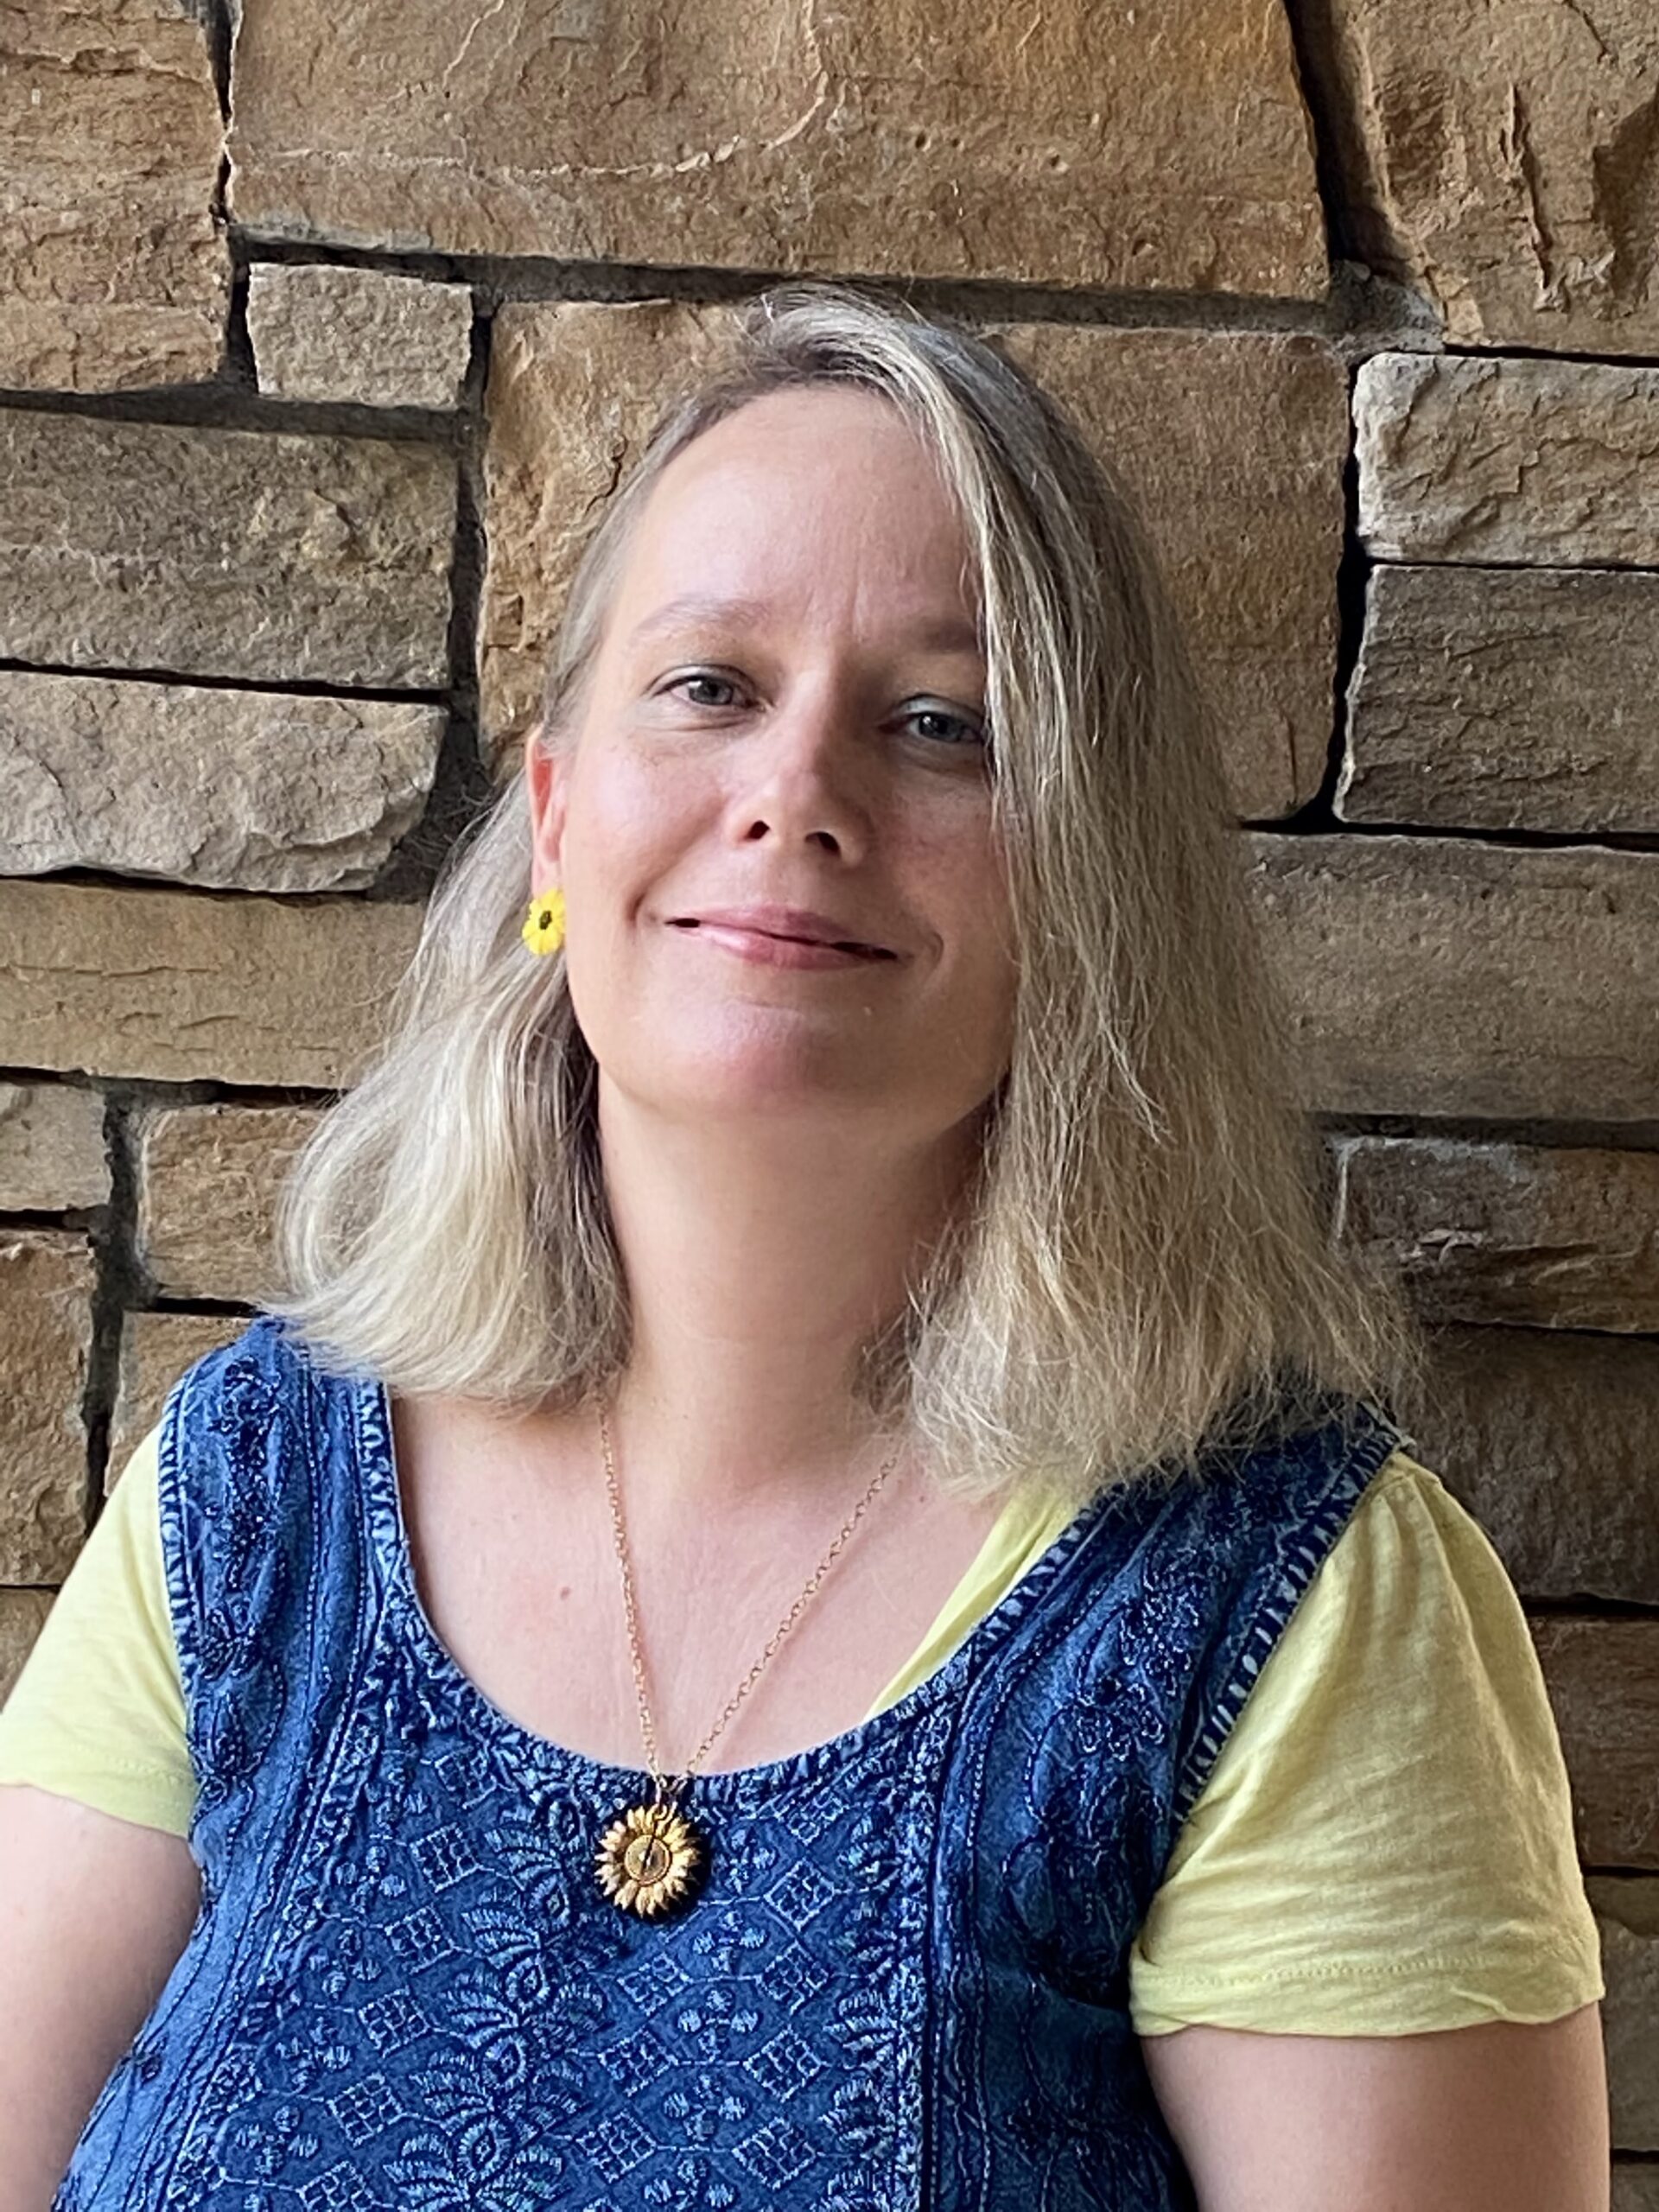 Photo of counselor Kimberley Hunt, LCSW and online therapist in North Carolina. Start online therapy for life changes counseling, anxiety, trauma, and more here!